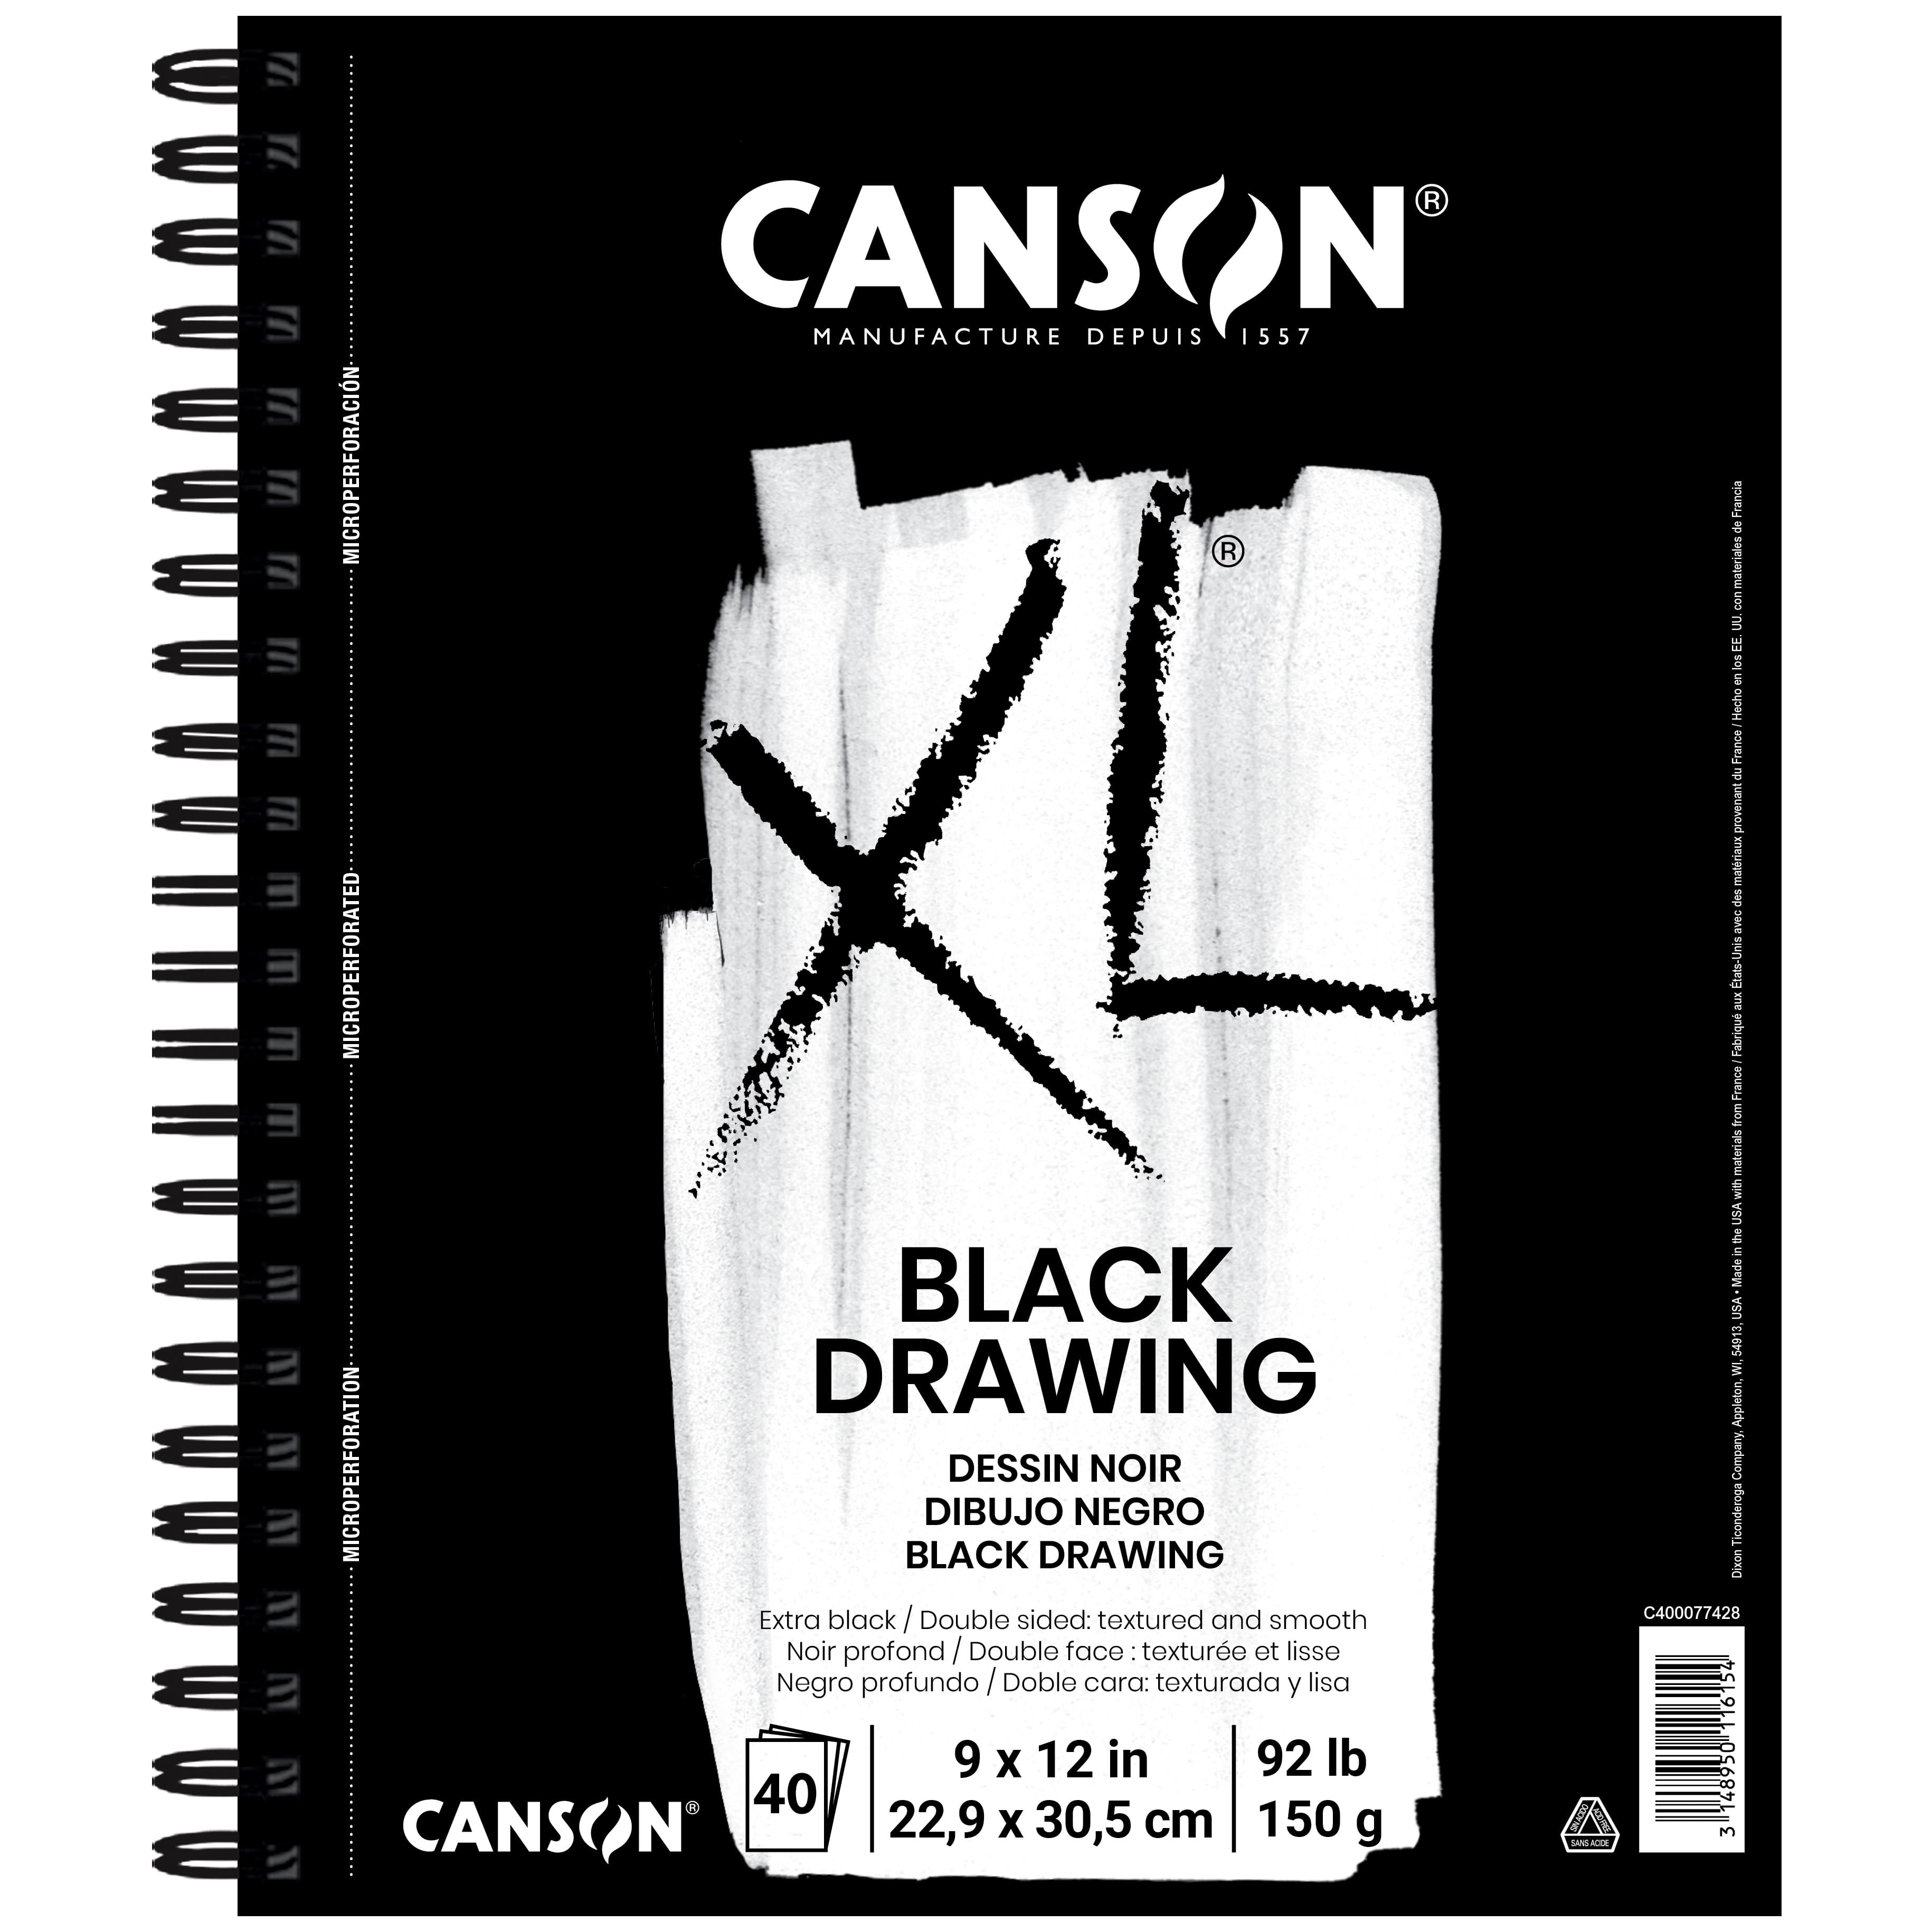 Canson Artist Series Drawing Paper, Wirebound Pad, 9x12 inches, 24 Sheets  (80lb/130g) - Artist Paper for Adults and Students - Charcoal, Colored